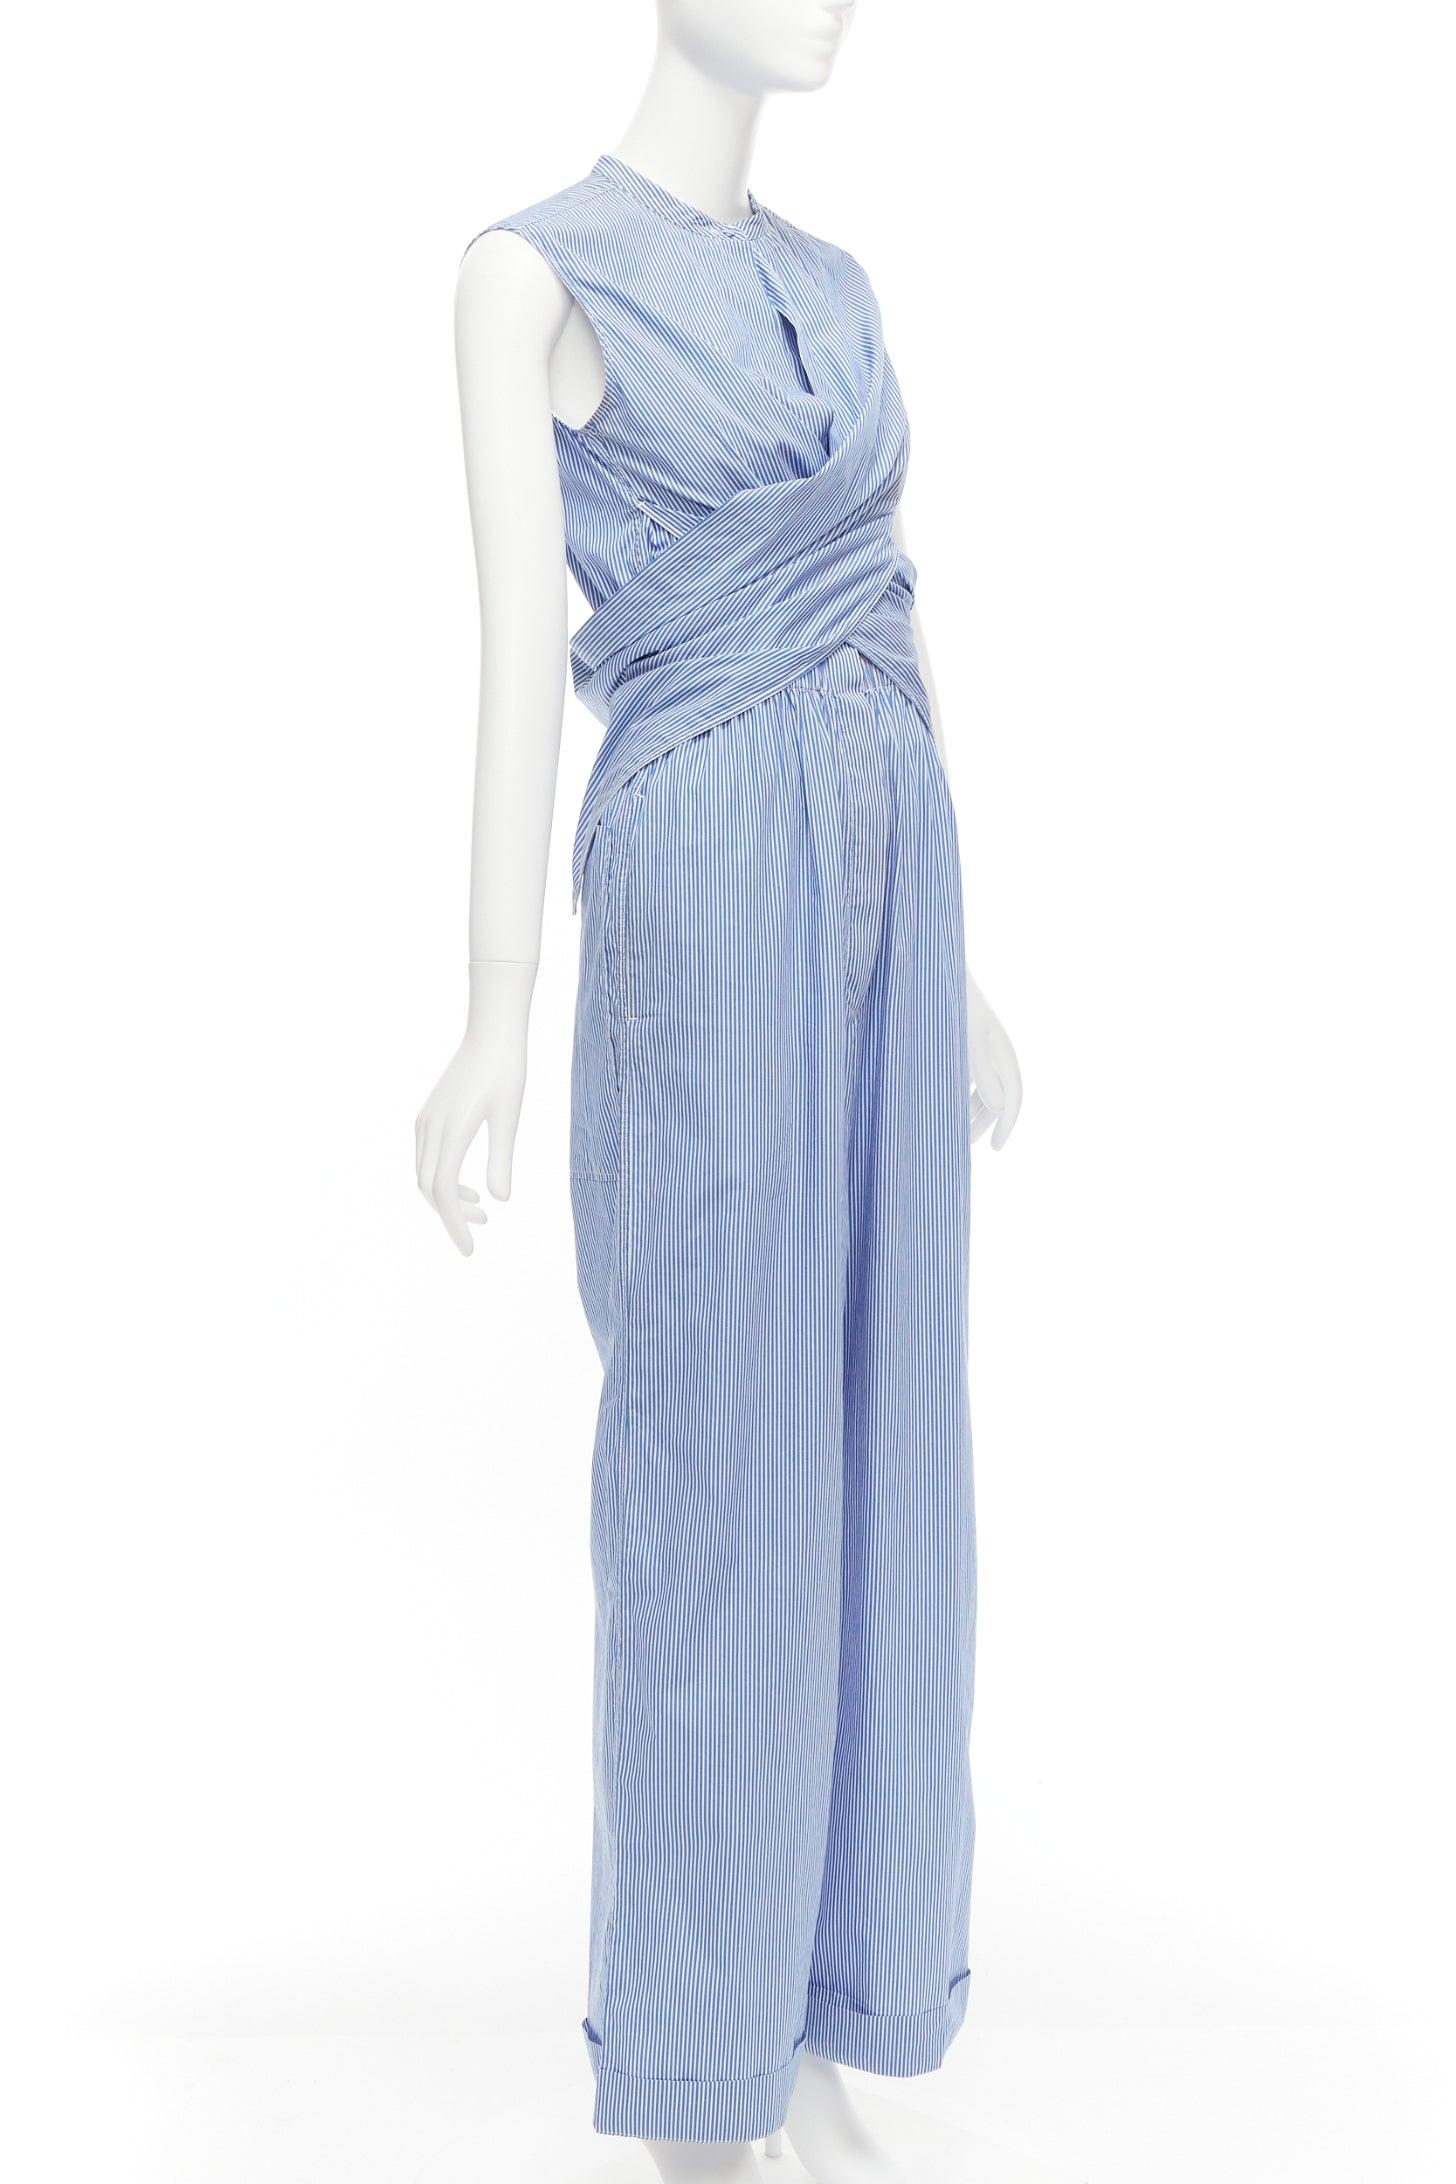 10 CORSO COMO blue white striped wrap top wide leg jumpsuit S
Reference: NKLL/A00039
Brand: 10 Corso Como
Material: Fabric
Color: White, Blue
Pattern: Striped
Closure: Button
Extra Details: Wrap front with button closure at